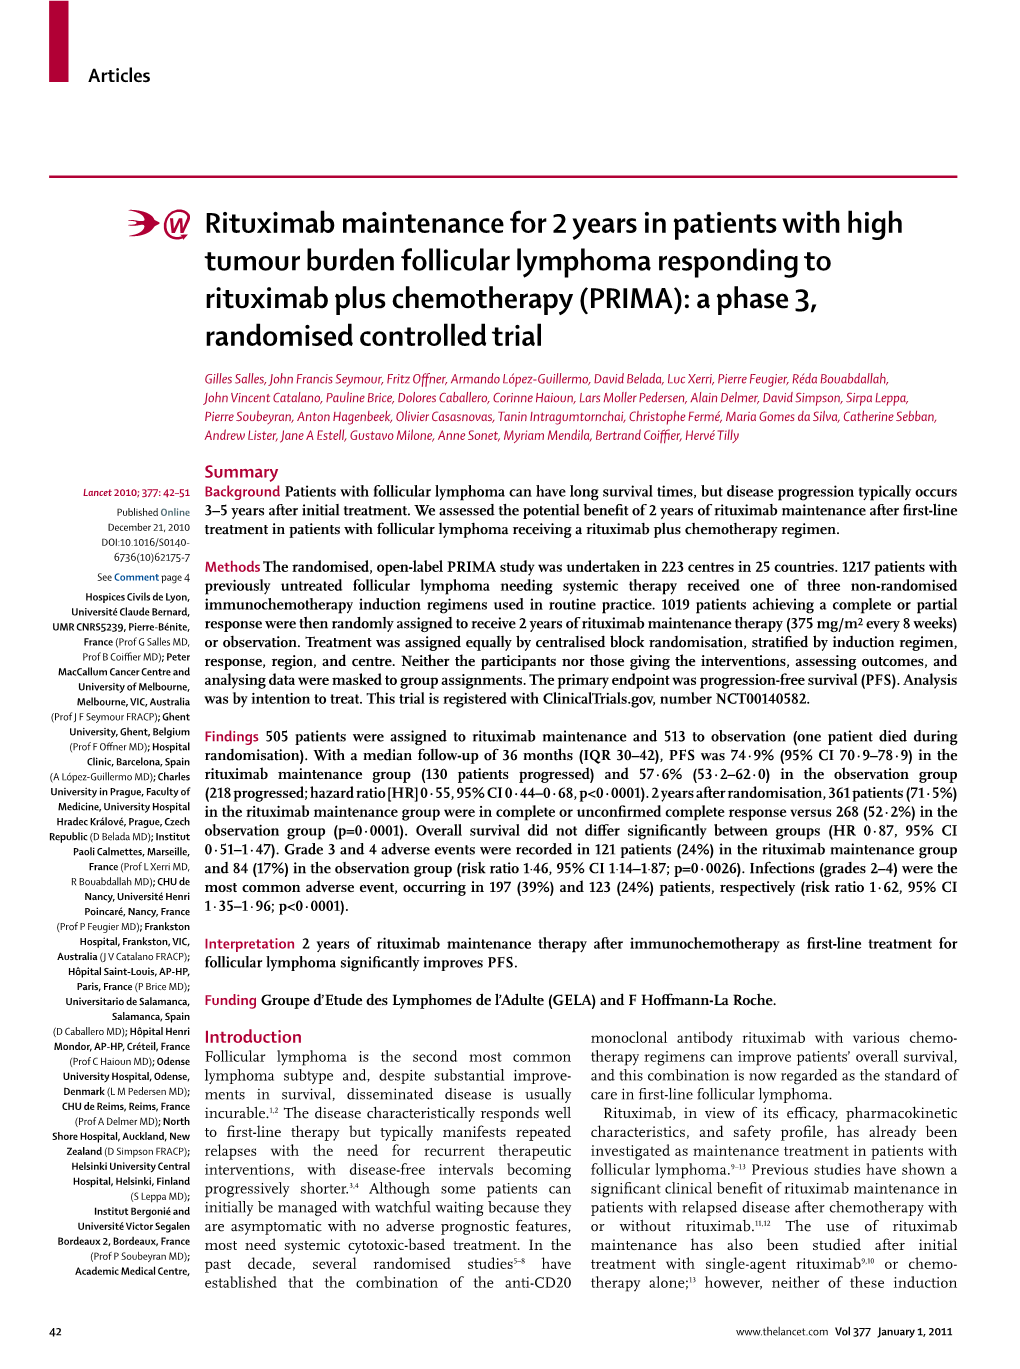 Rituximab Maintenance for 2 Years in Patients with High Tumour Burden